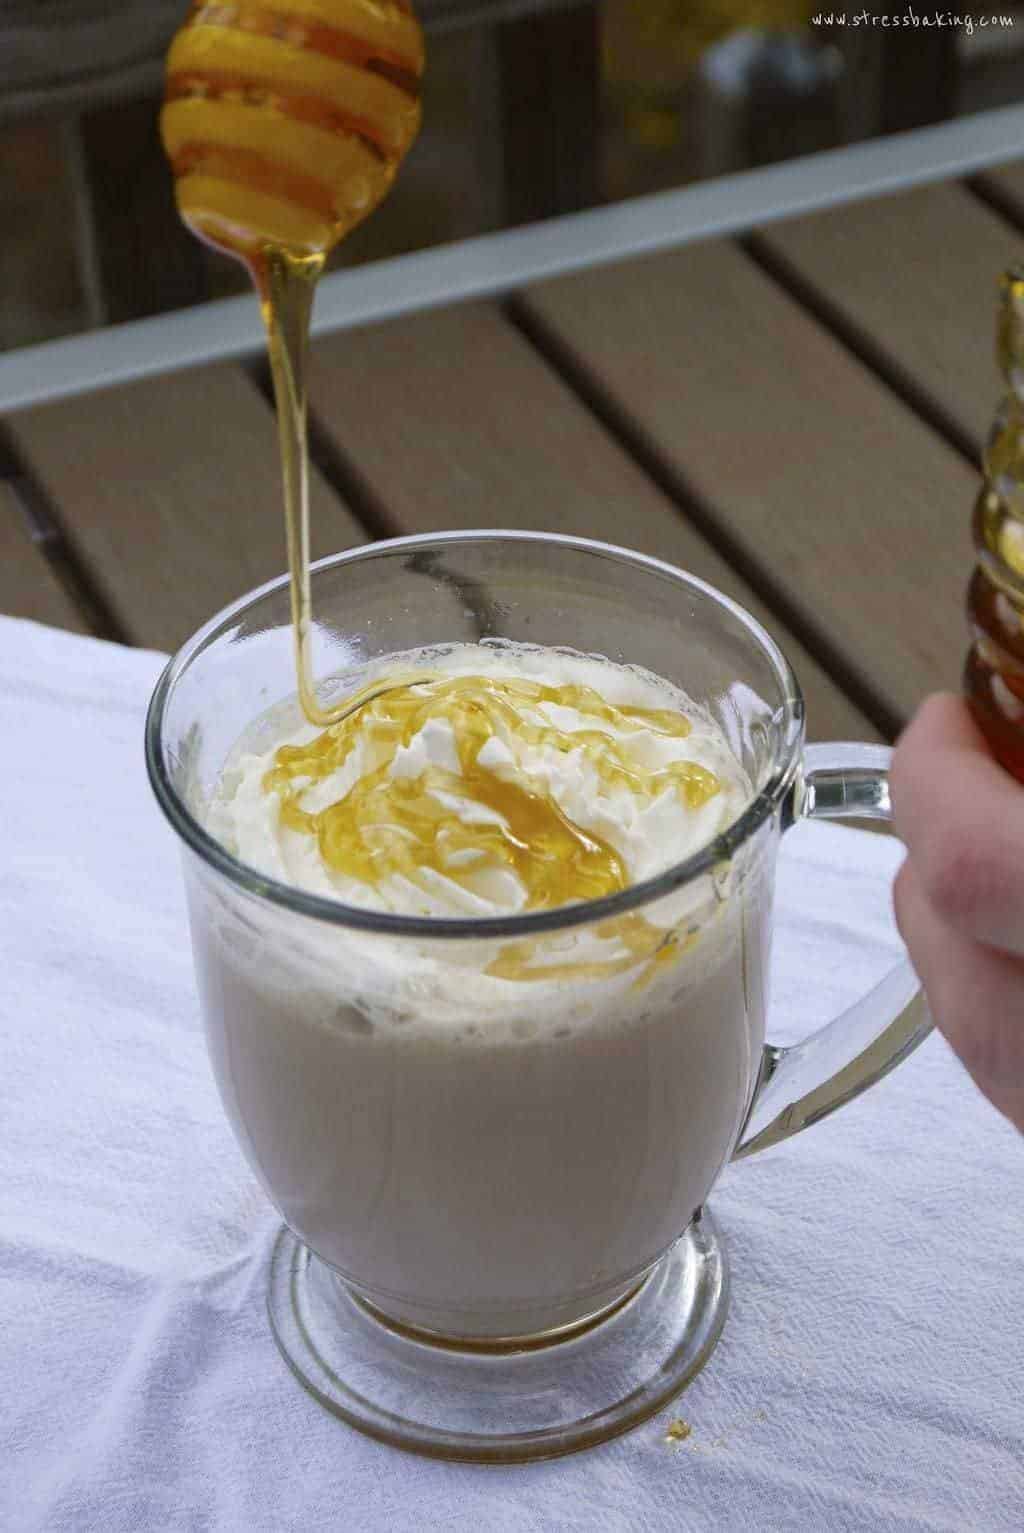 Honey being drizzle onto whipped cream topping a latte in a clear mug